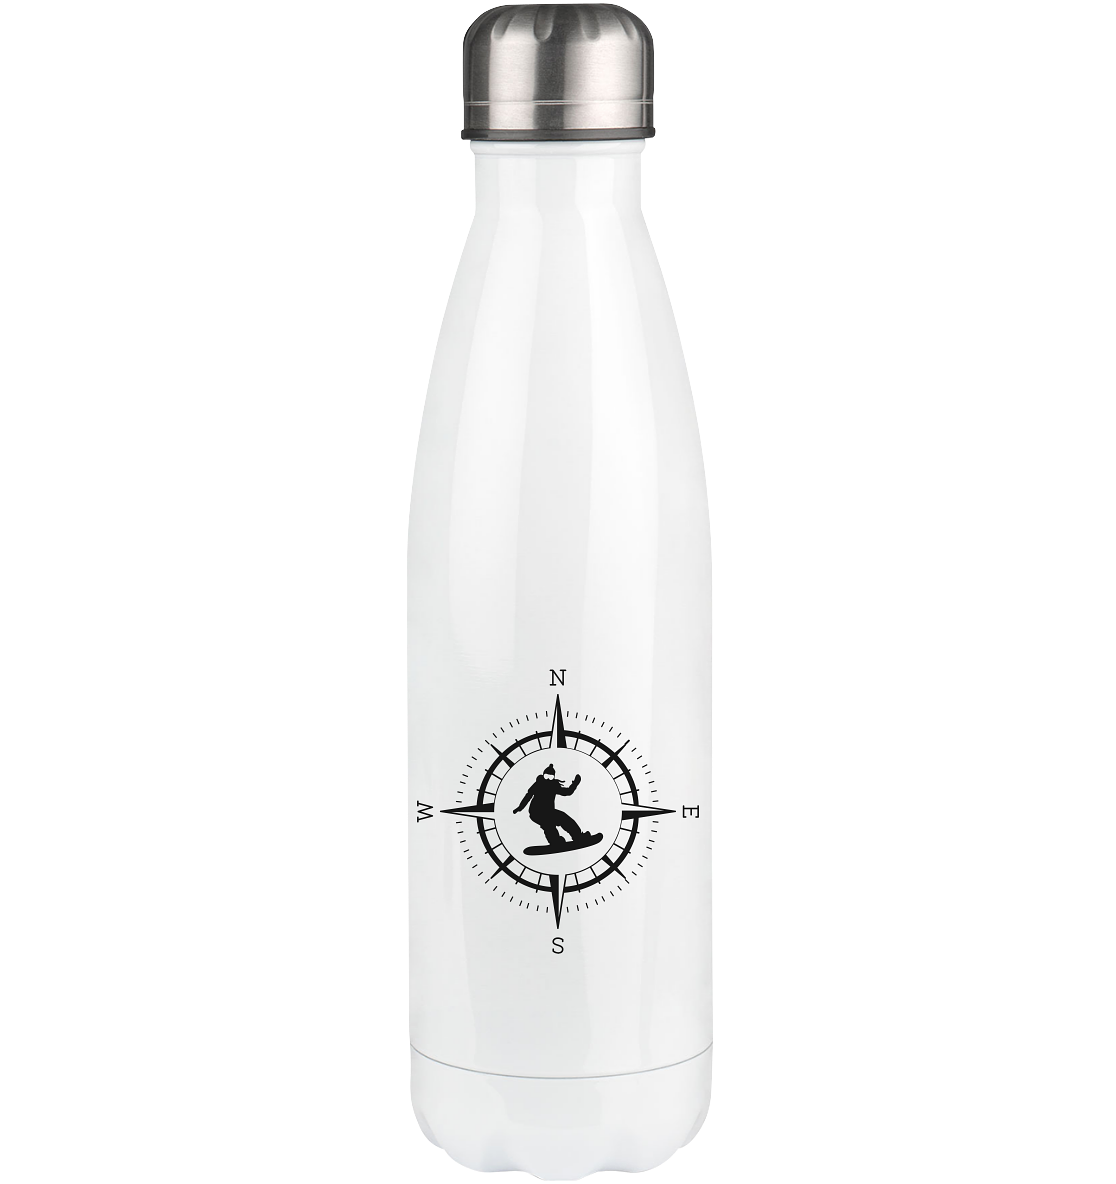 Compass and Snowboarding - Edelstahl Thermosflasche snowboarden 500ml